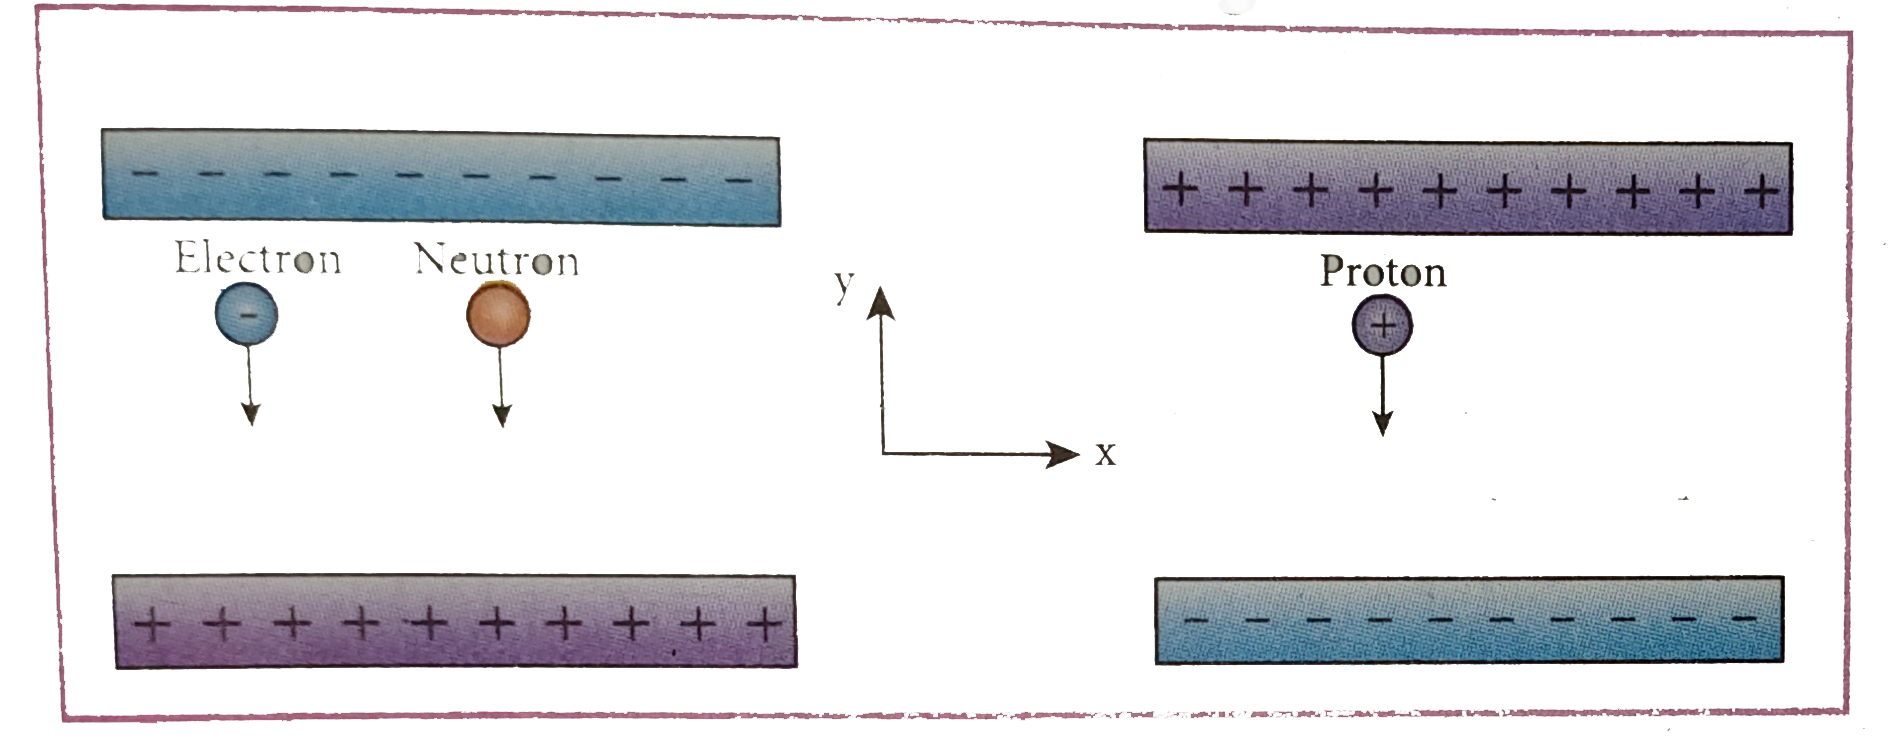 An electron and a proton are allowed to fall through the separation between the plates of a parallel plate capacitor of voltage 5 V and separation distance h=1 mm as shown in the figure.      Suppose if a neutron is allowed to fall, what is the time of flight?